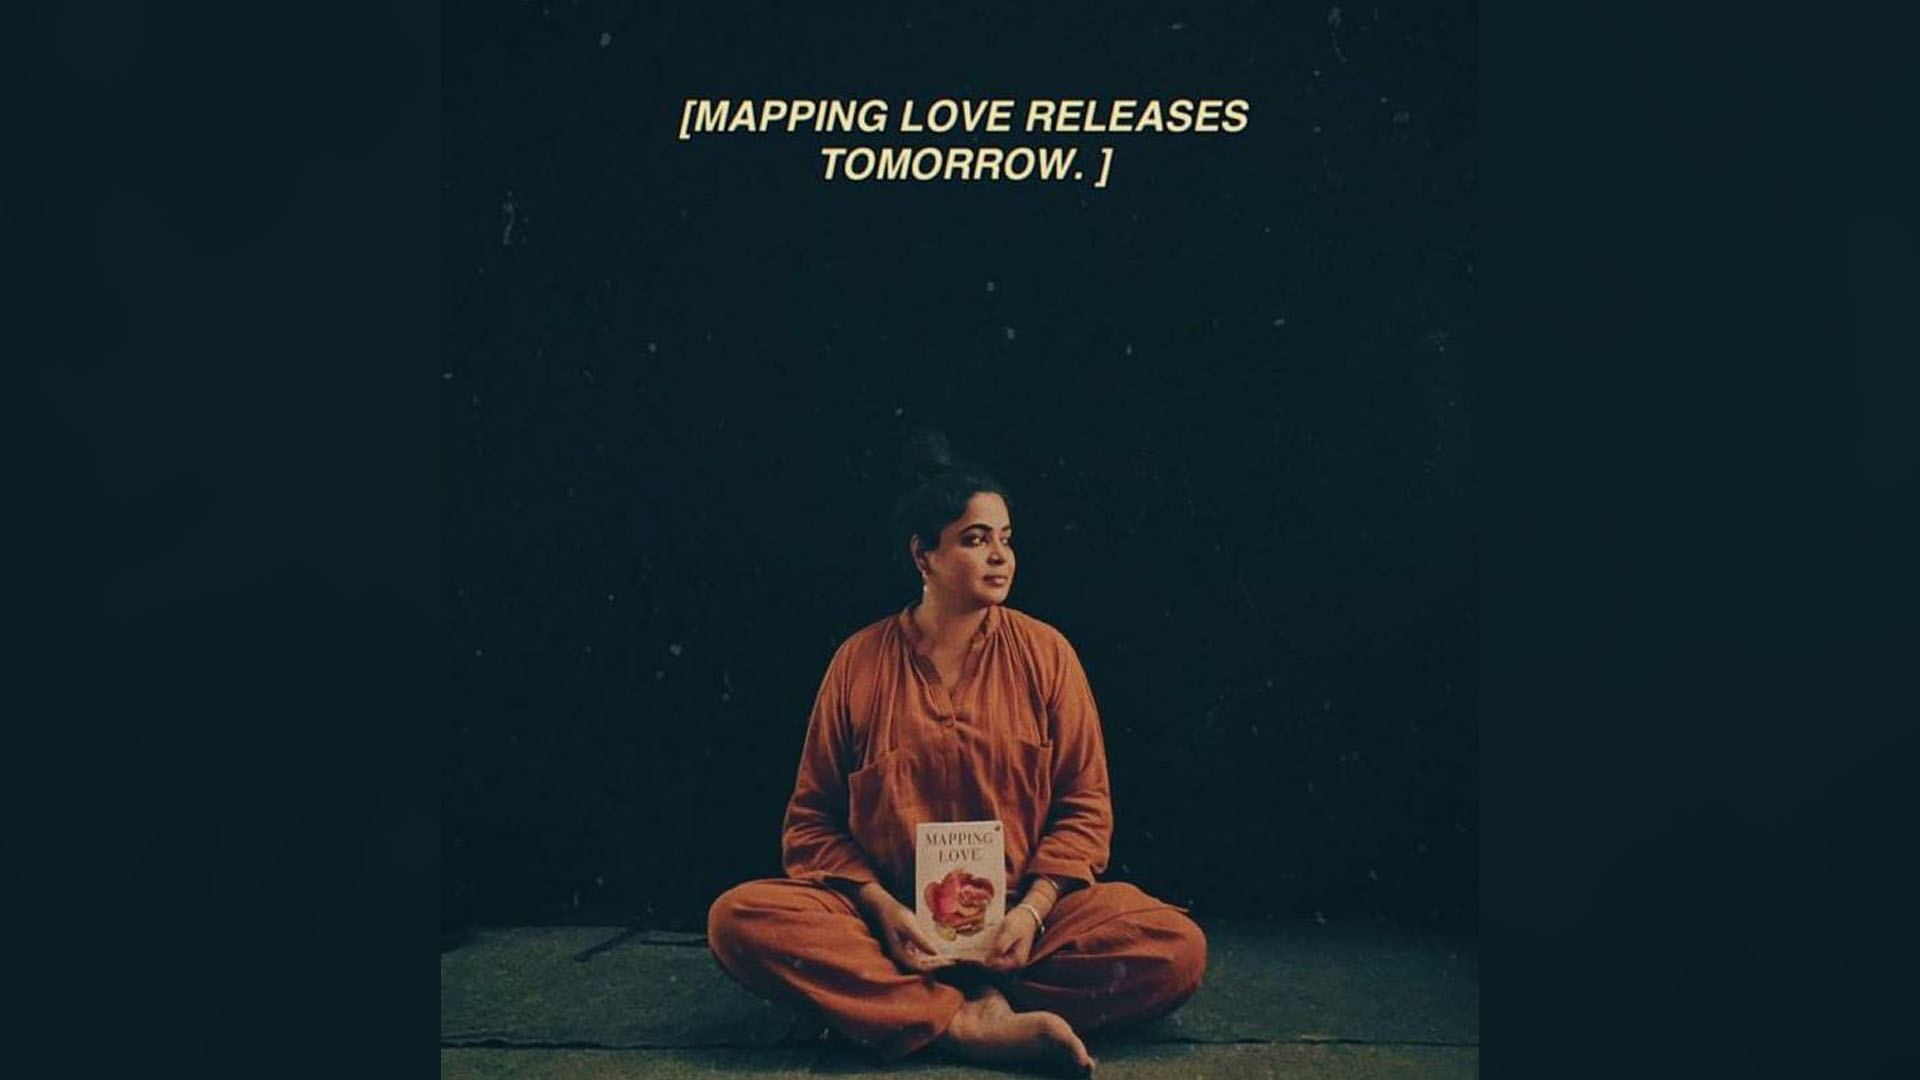 Author-Filmmaker Ashwiny Iyer Tiwari expresses gratitude to everyone for the love towards her debut novel ‘Mapping Love’, see video!